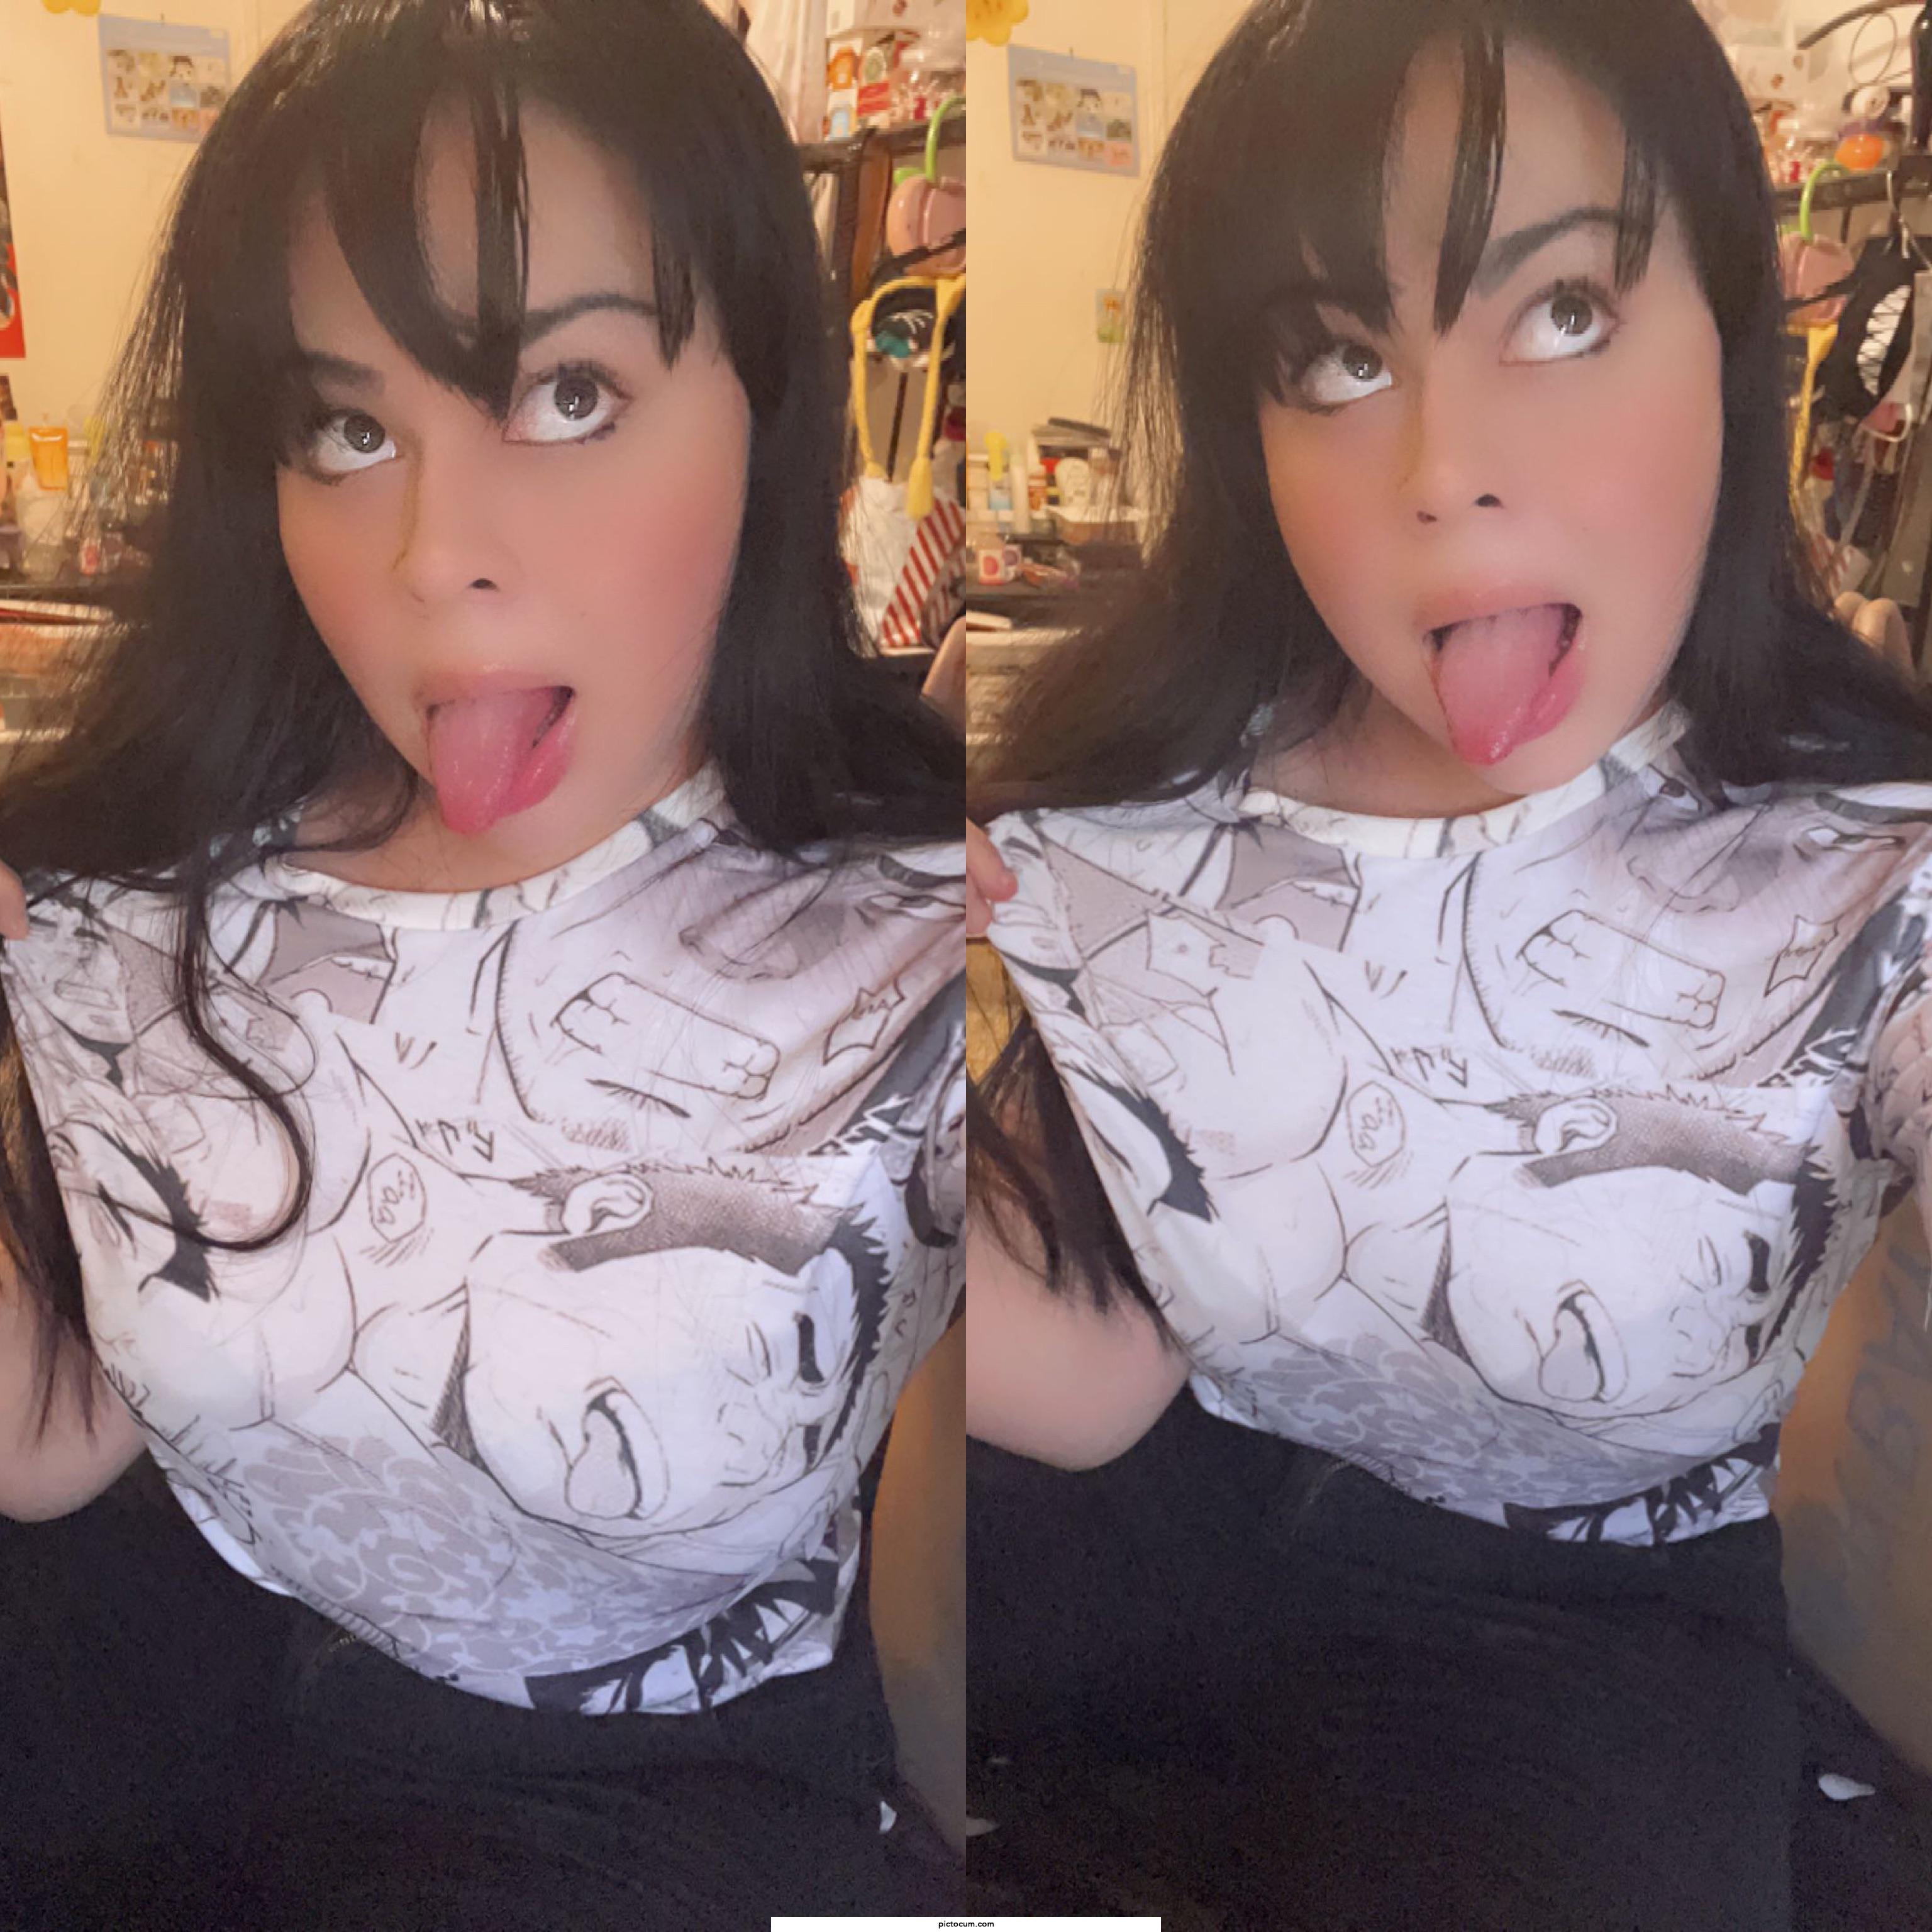 Just showing off my ahegao shirt! 😛